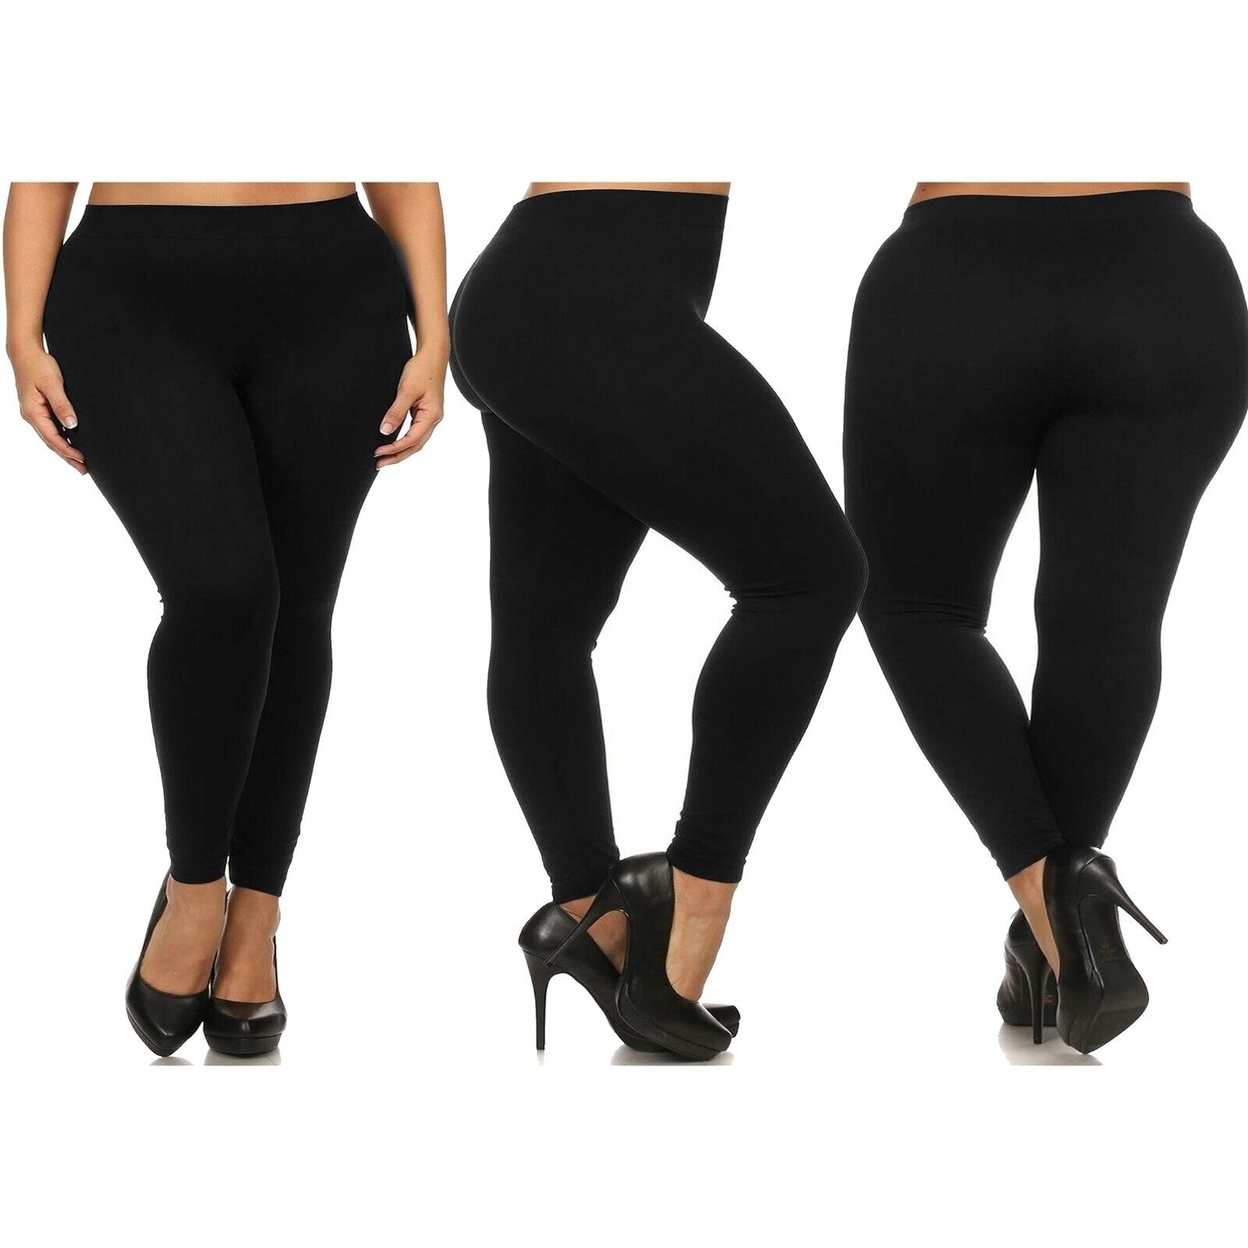 2-Pack: Women's Casual Ultra-Soft Smooth High Waisted Athletic Active Yoga Leggings Plus Size Available - Beige & Black, 3x